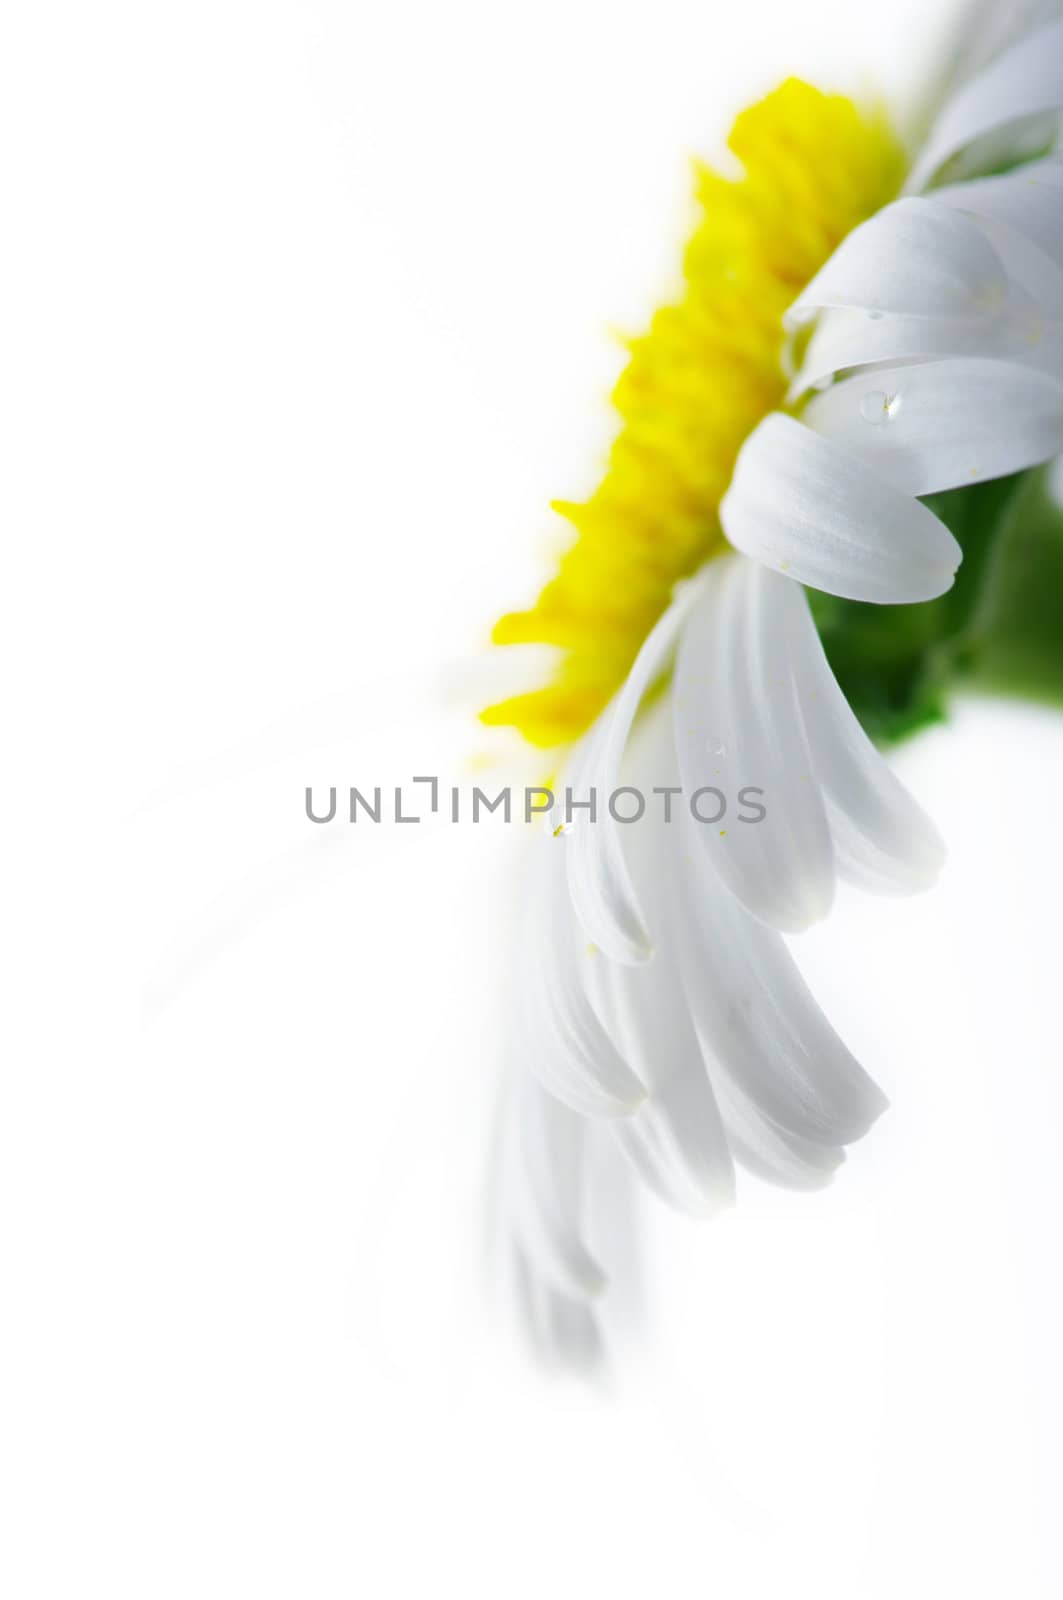 White camomile flower close-up against white background. Focun on the water drop.